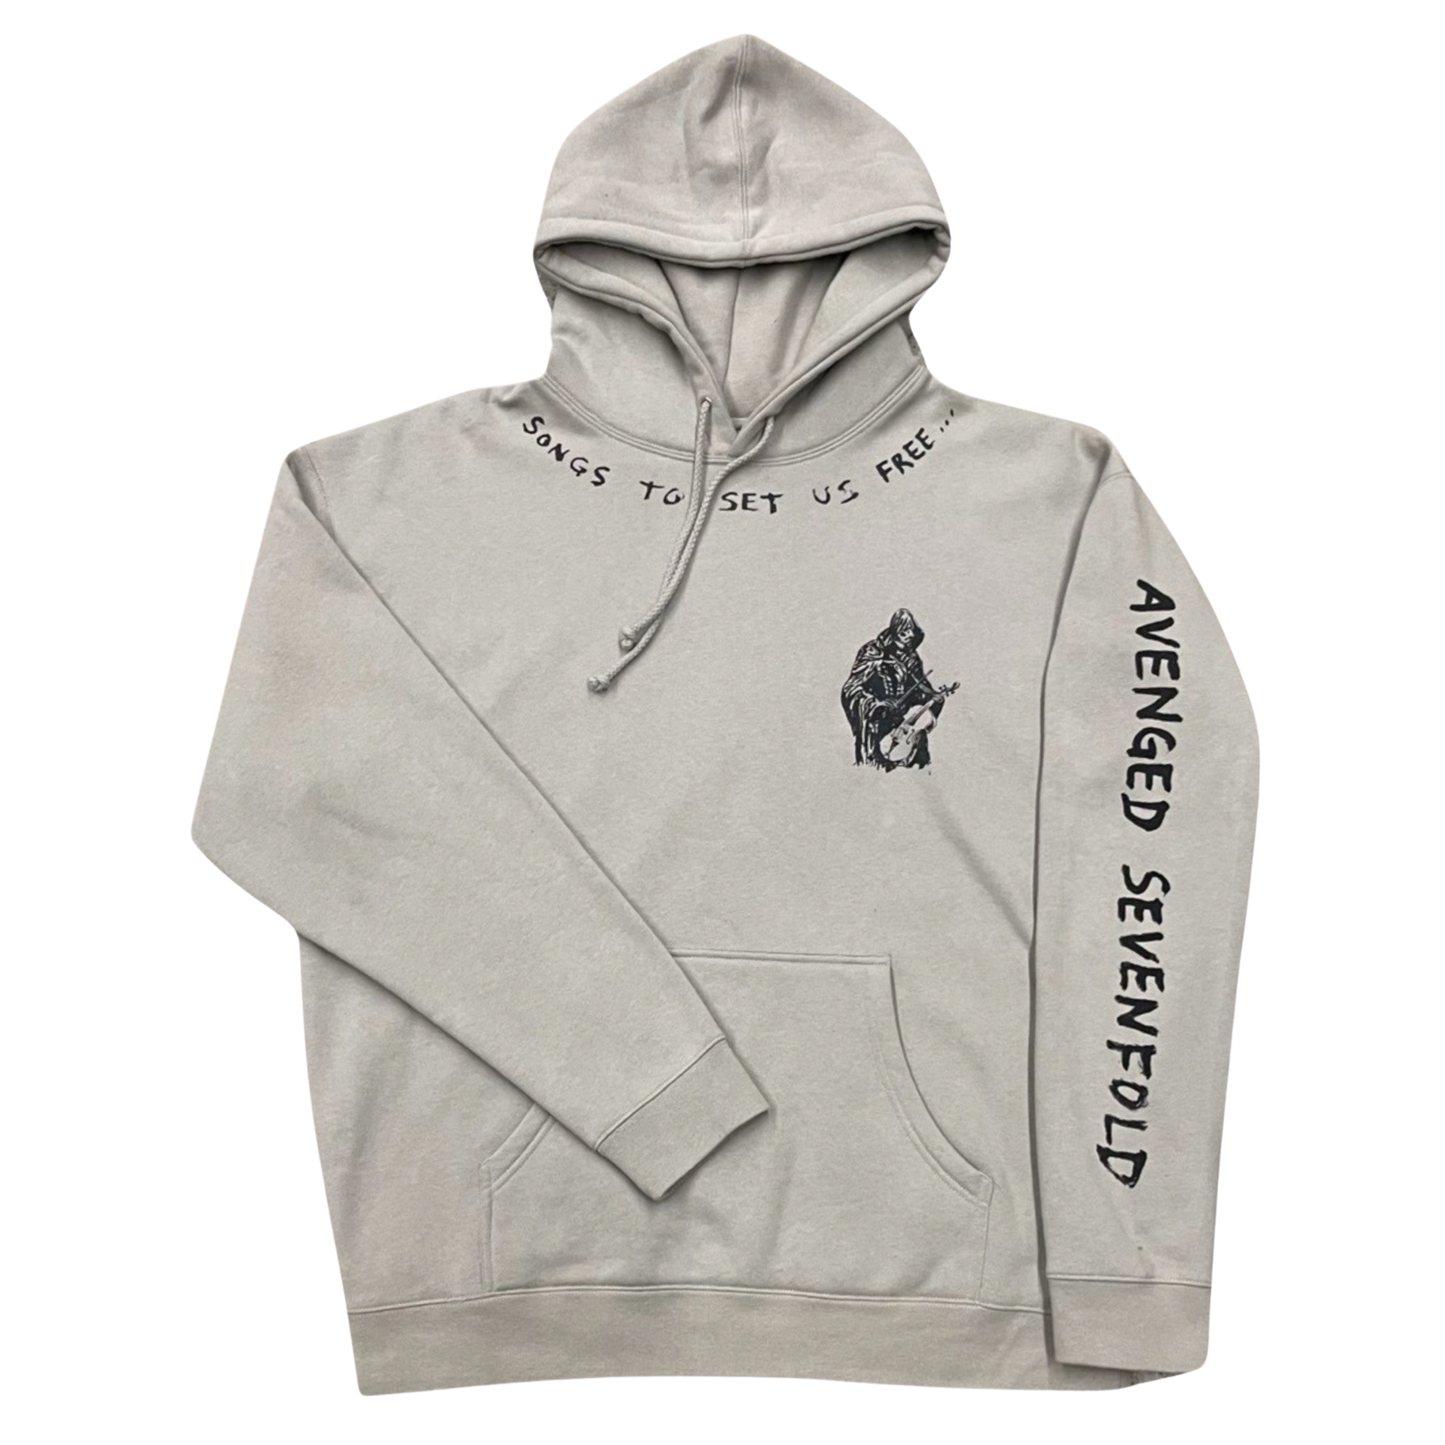 Songs to Set Us Free - Heavyweight Hooded Pullover